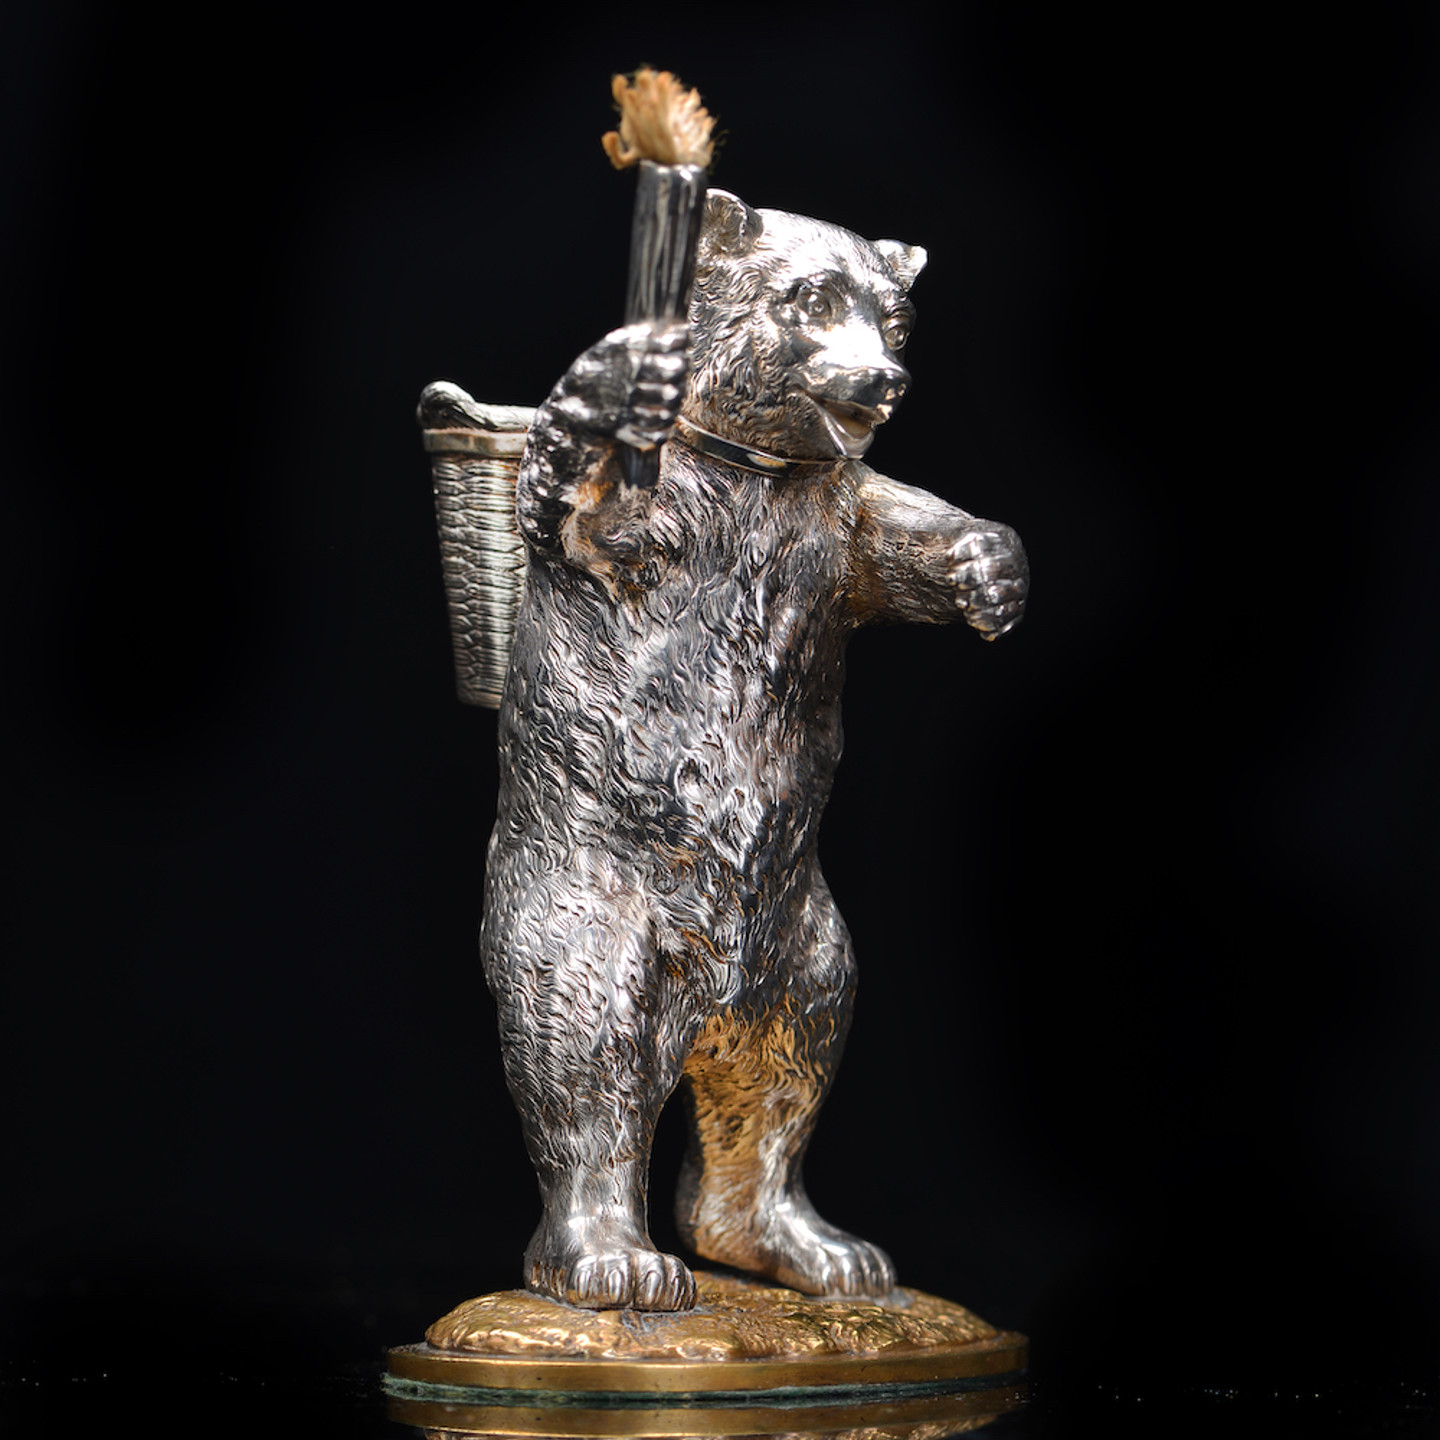 Victorian Novelty Hallmarked Silver Table Lighter Formed As A Bear, London 1876 Maker James Barclay Hennell, Height 14Cm. Sold For £3650